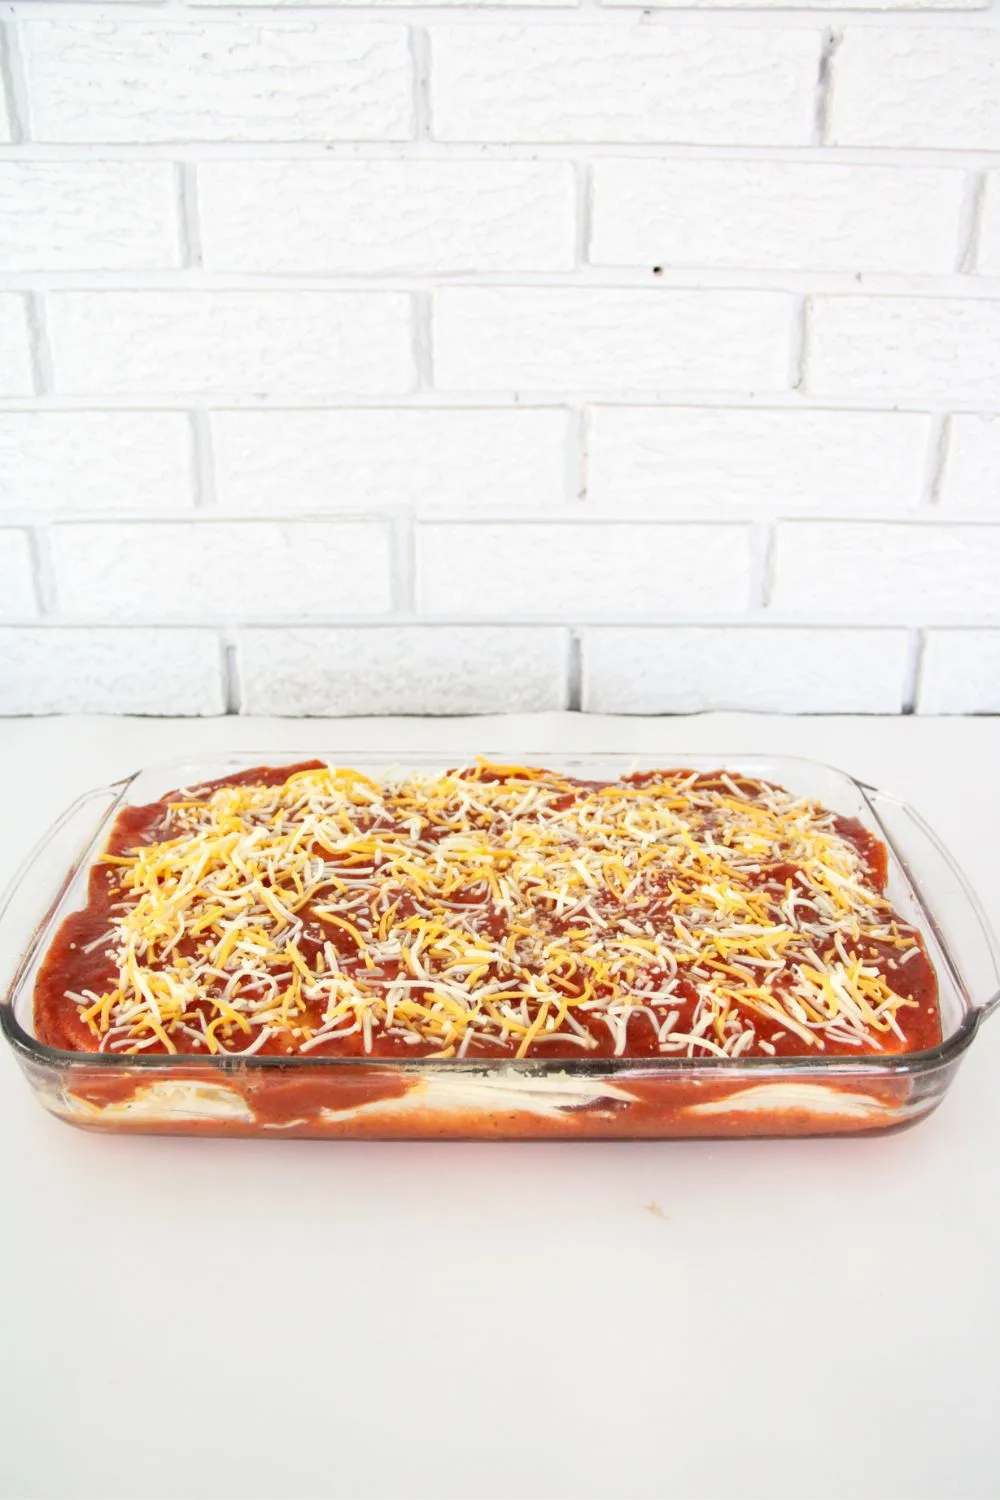 Weight Watchers Enchilada Casserole ready to be baked